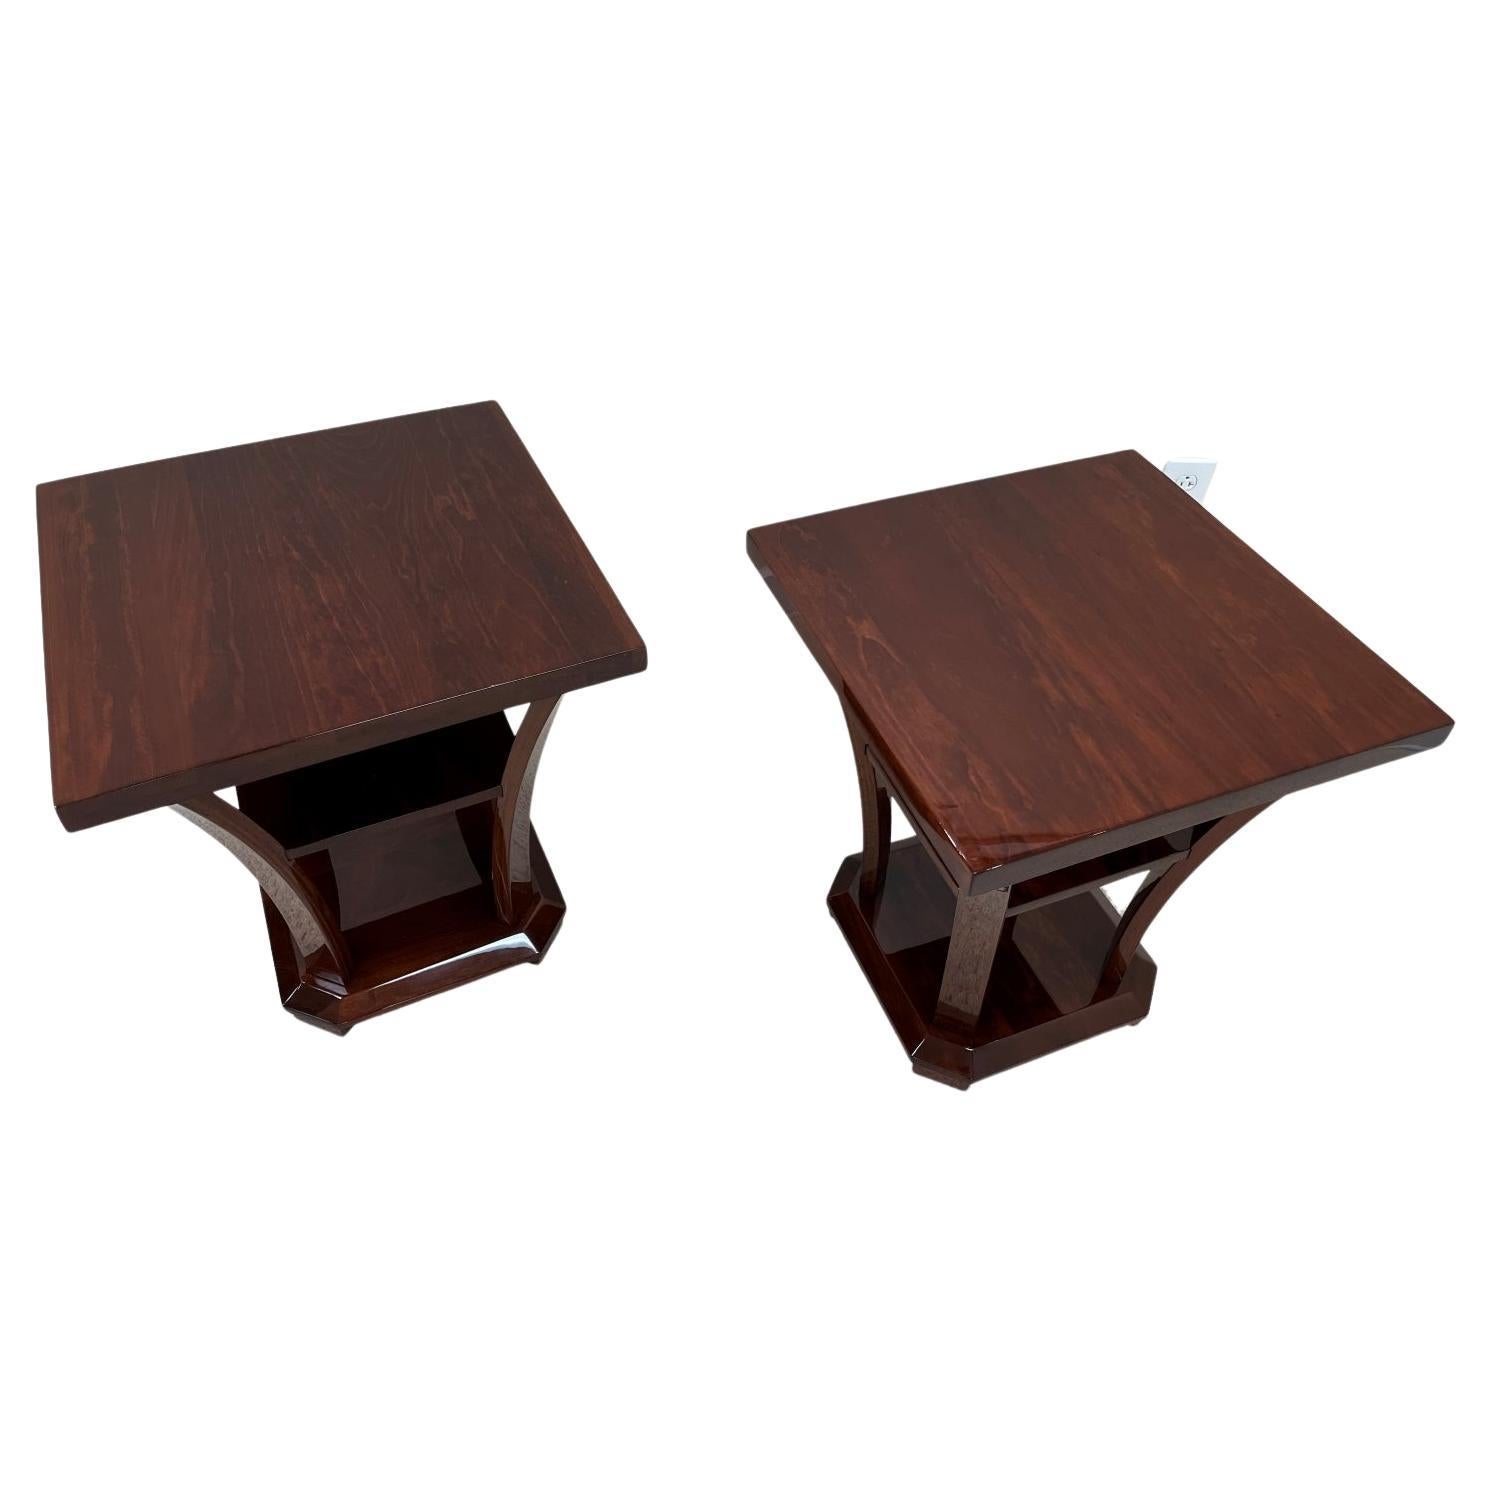 Stained Pair Of Art Deco Modernist Square Top Three Tier Side Tables, American C. 1930's For Sale